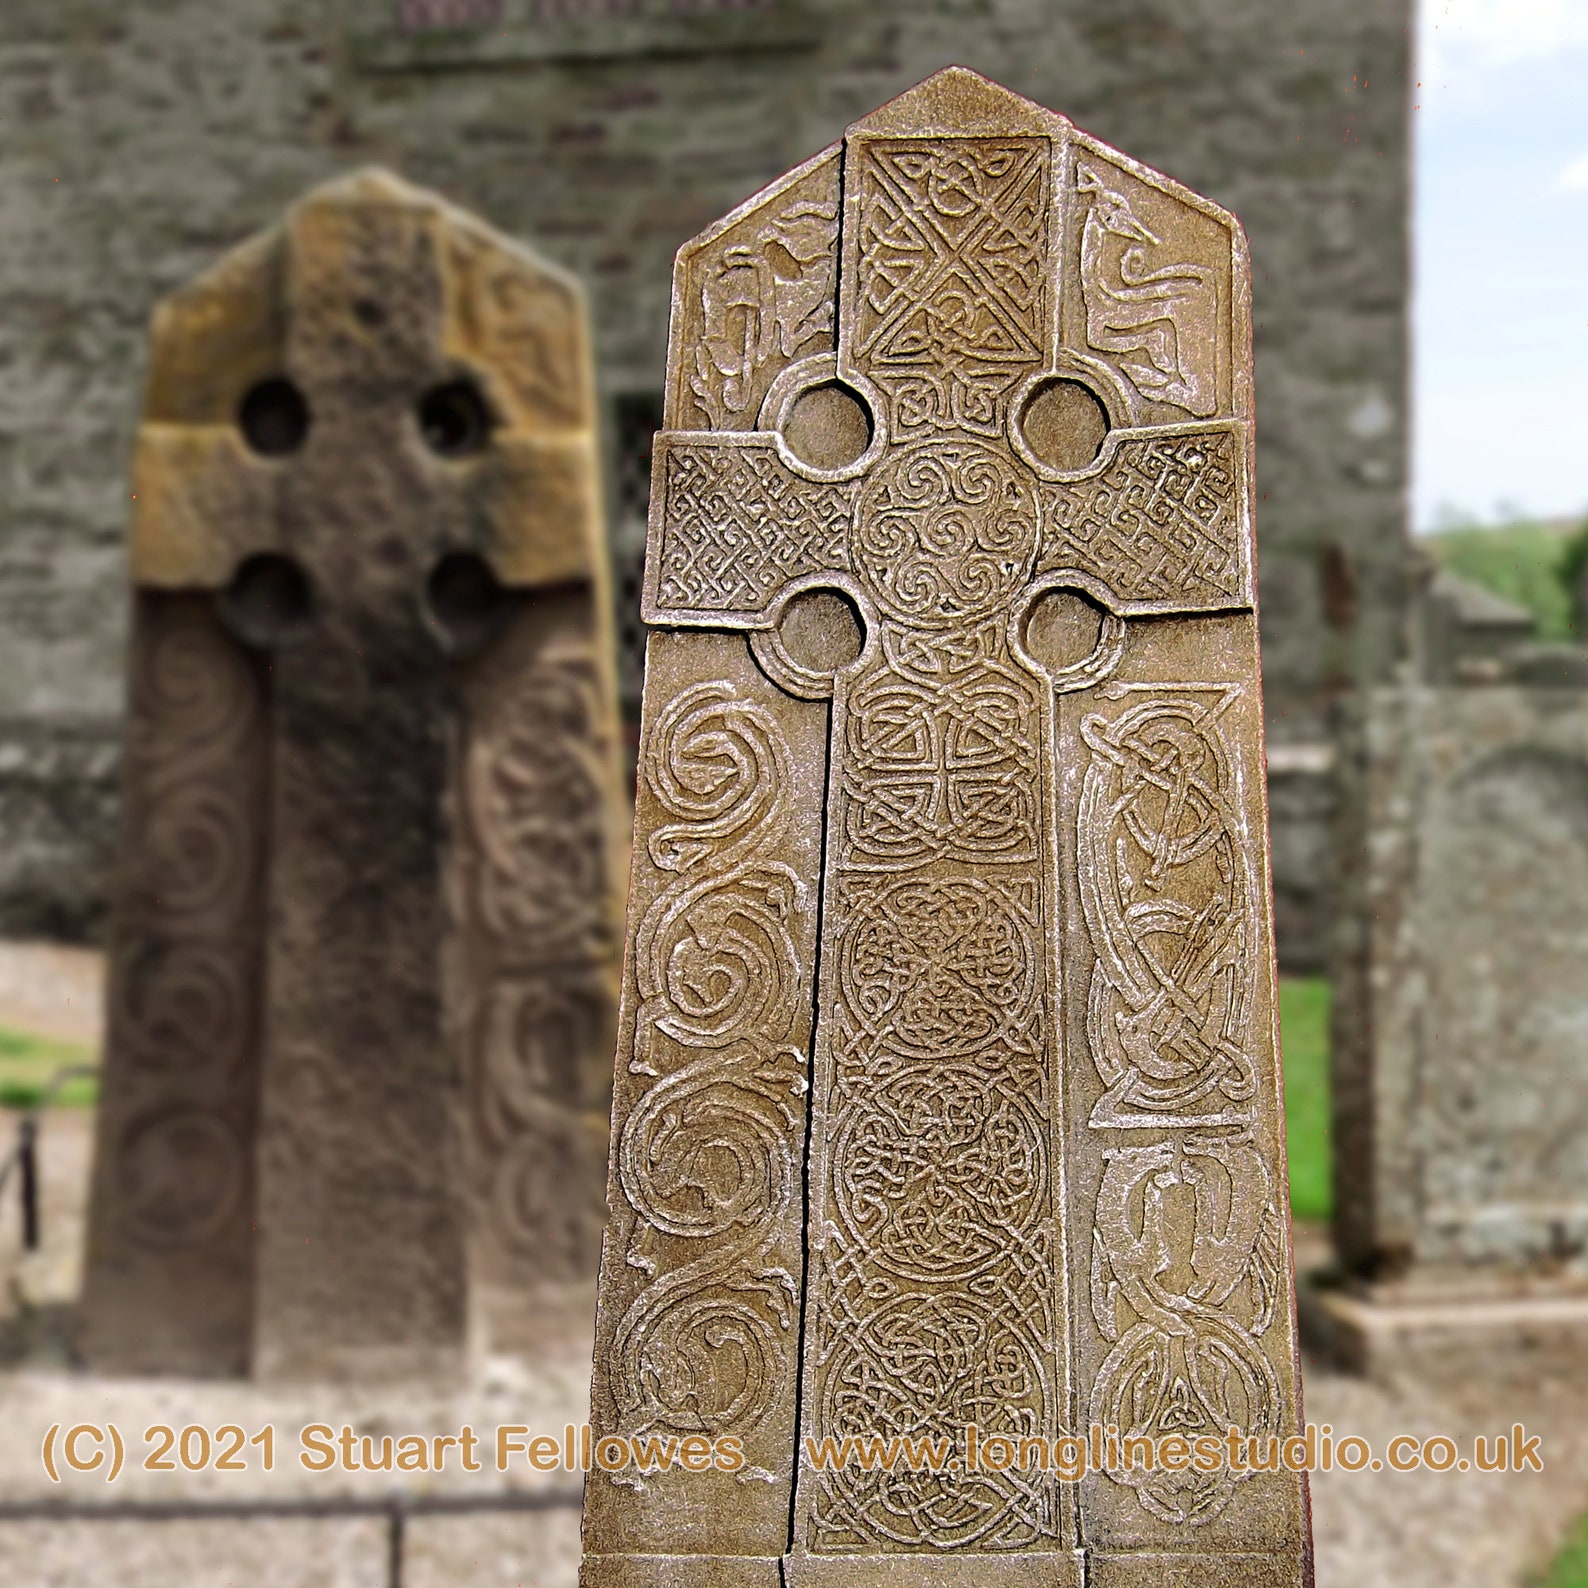 scale model of the Aberlemno Pictish Cross with Celtic designs in the foreground with the life size cross in the background